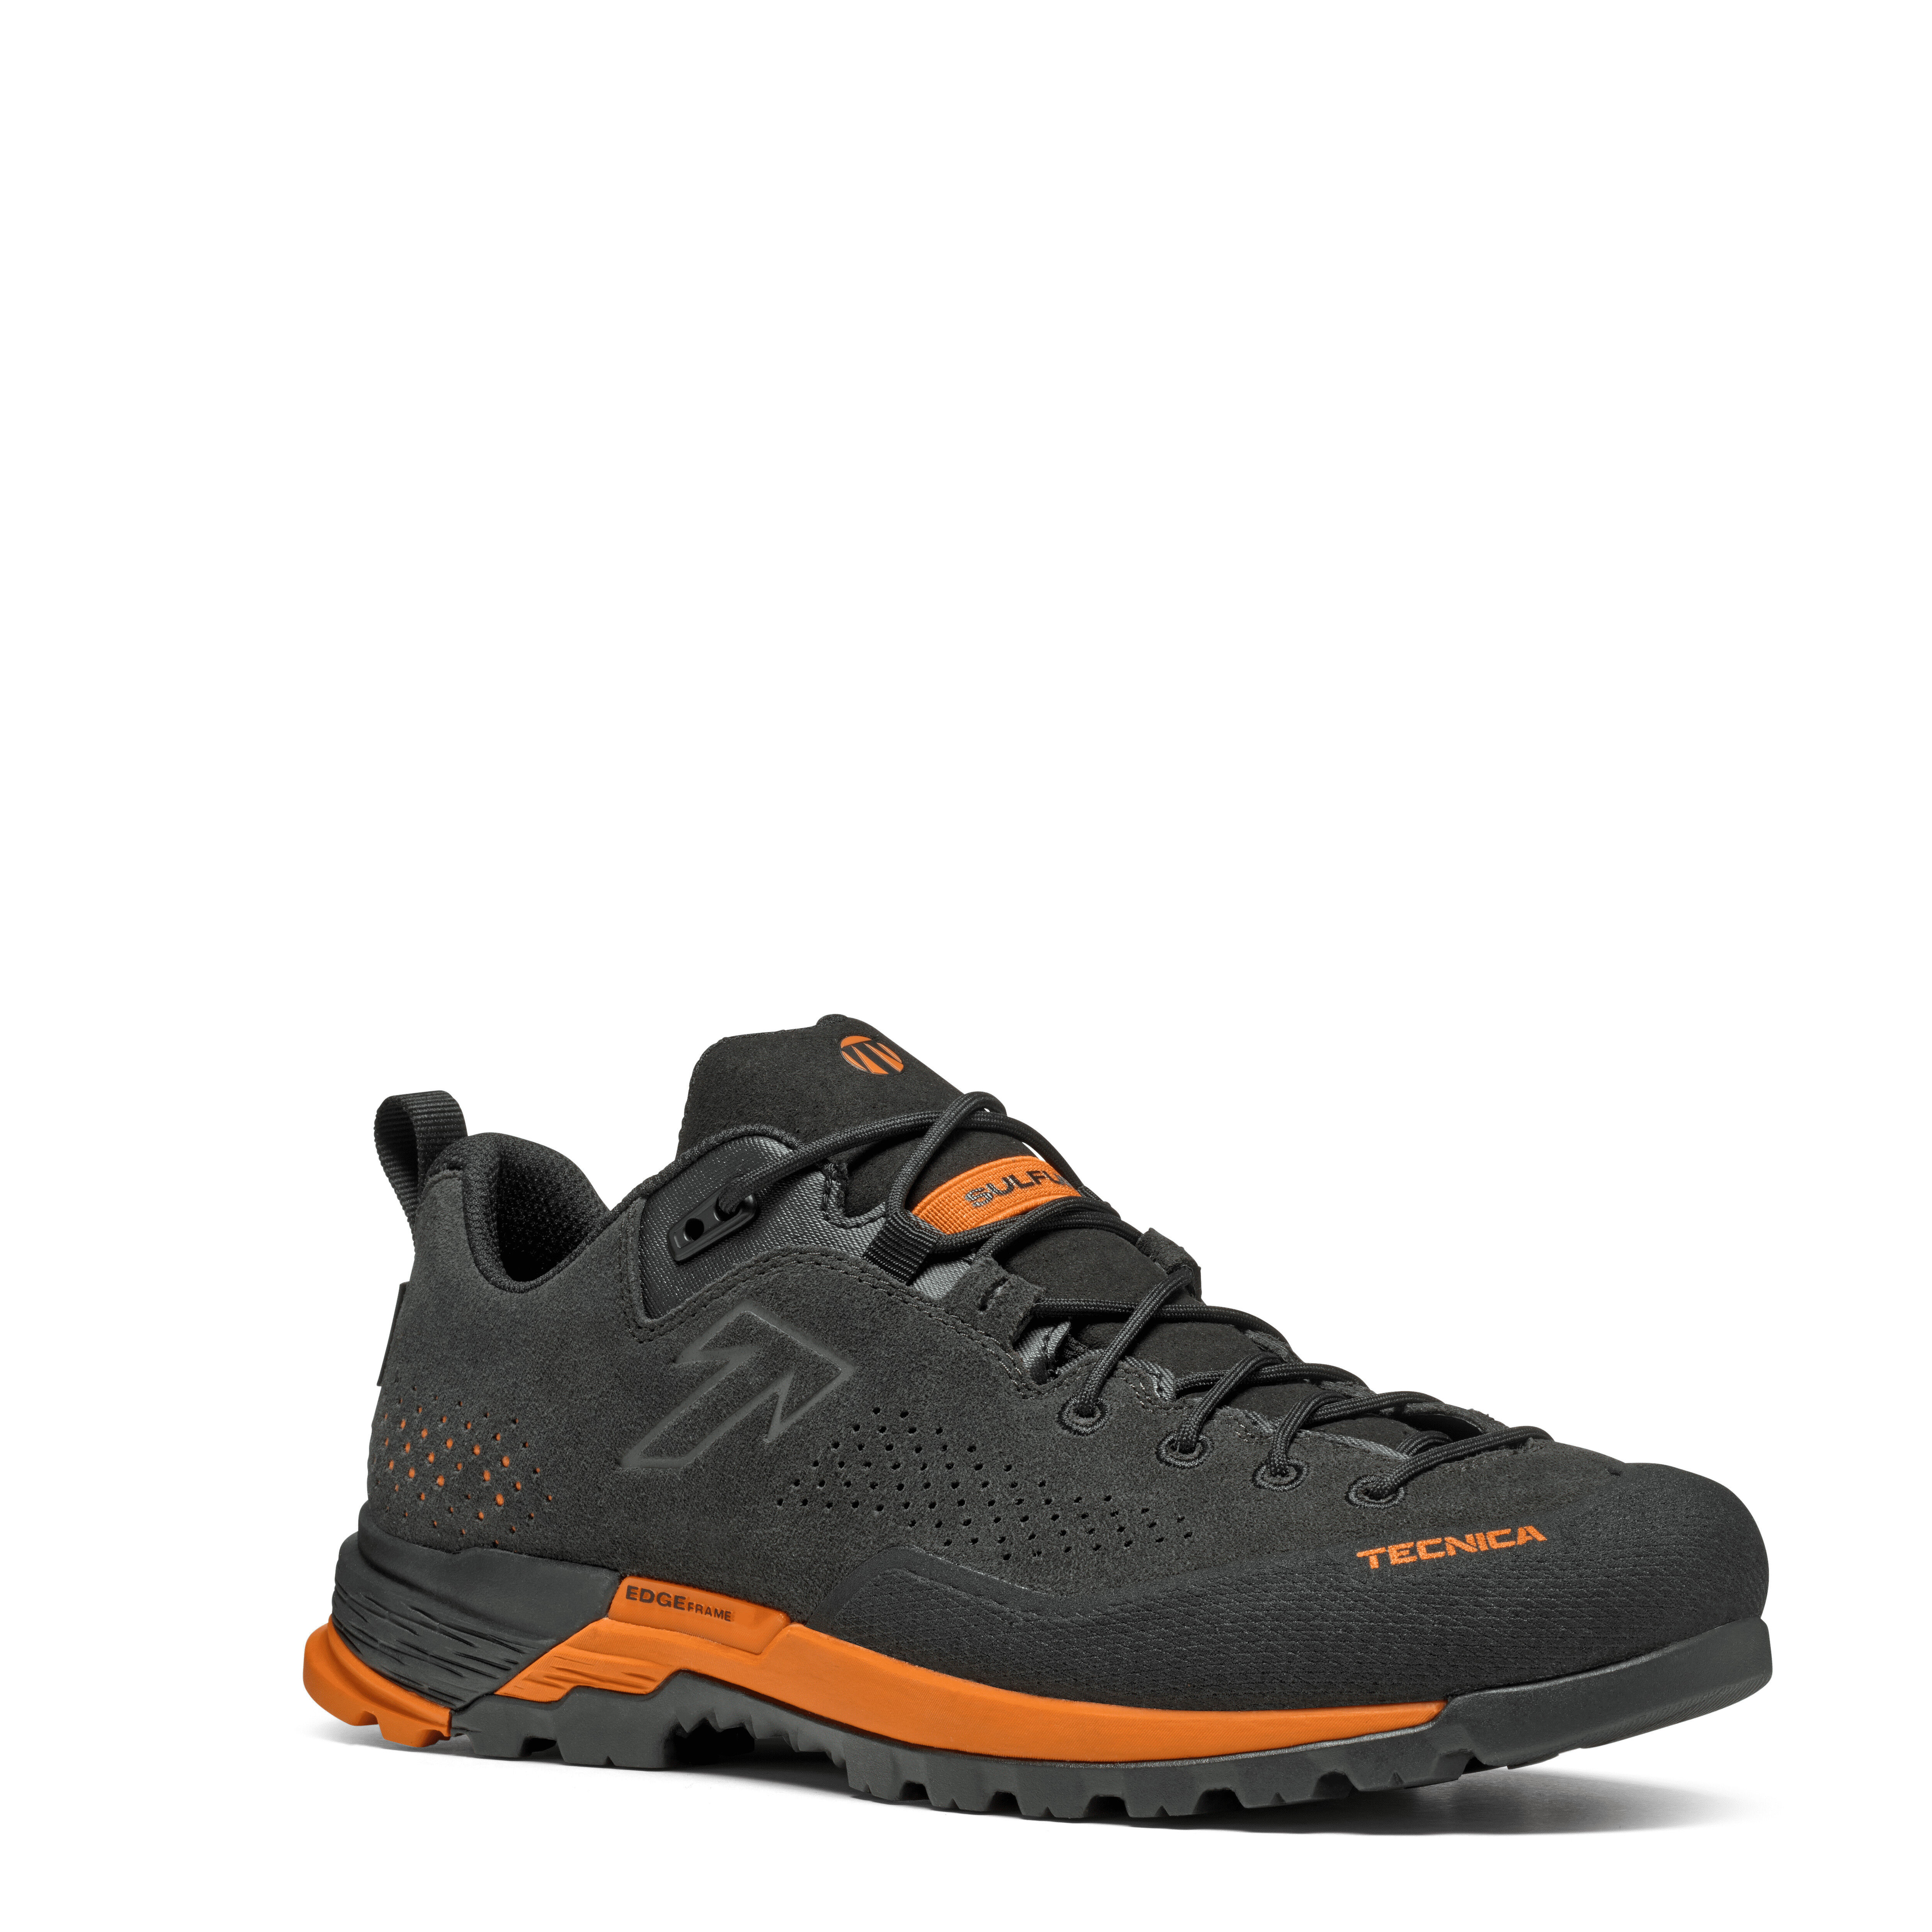 Tecnica Sulfur GTX - Chaussures approche homme | Hardloop